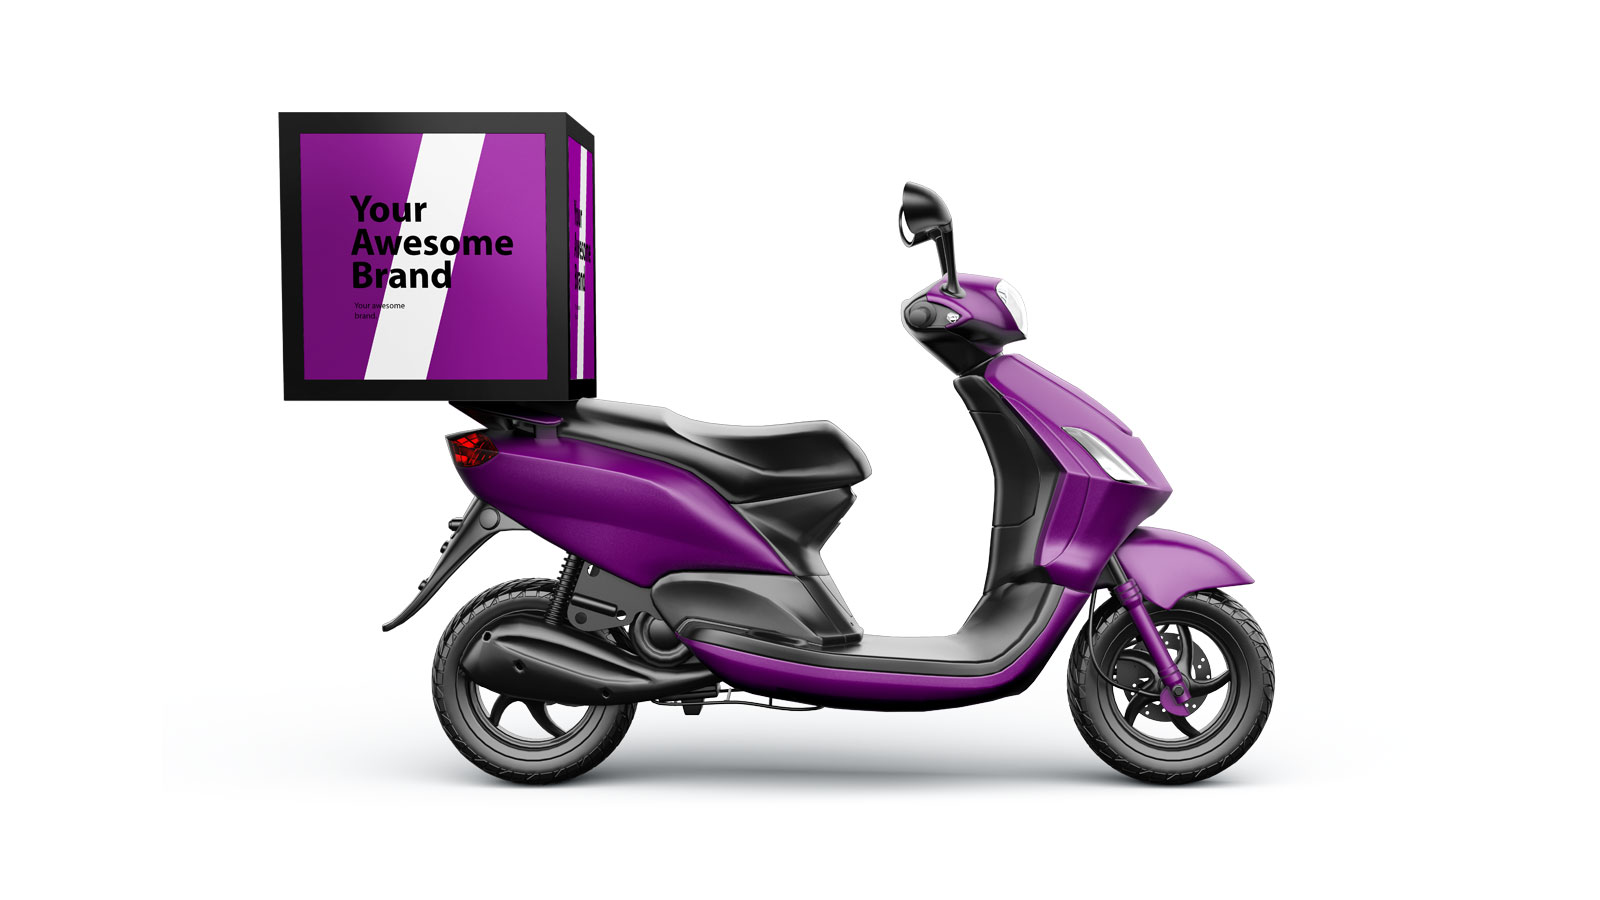 Branded purple delivery scooter with a delivery box, showcasing unique small business branding.